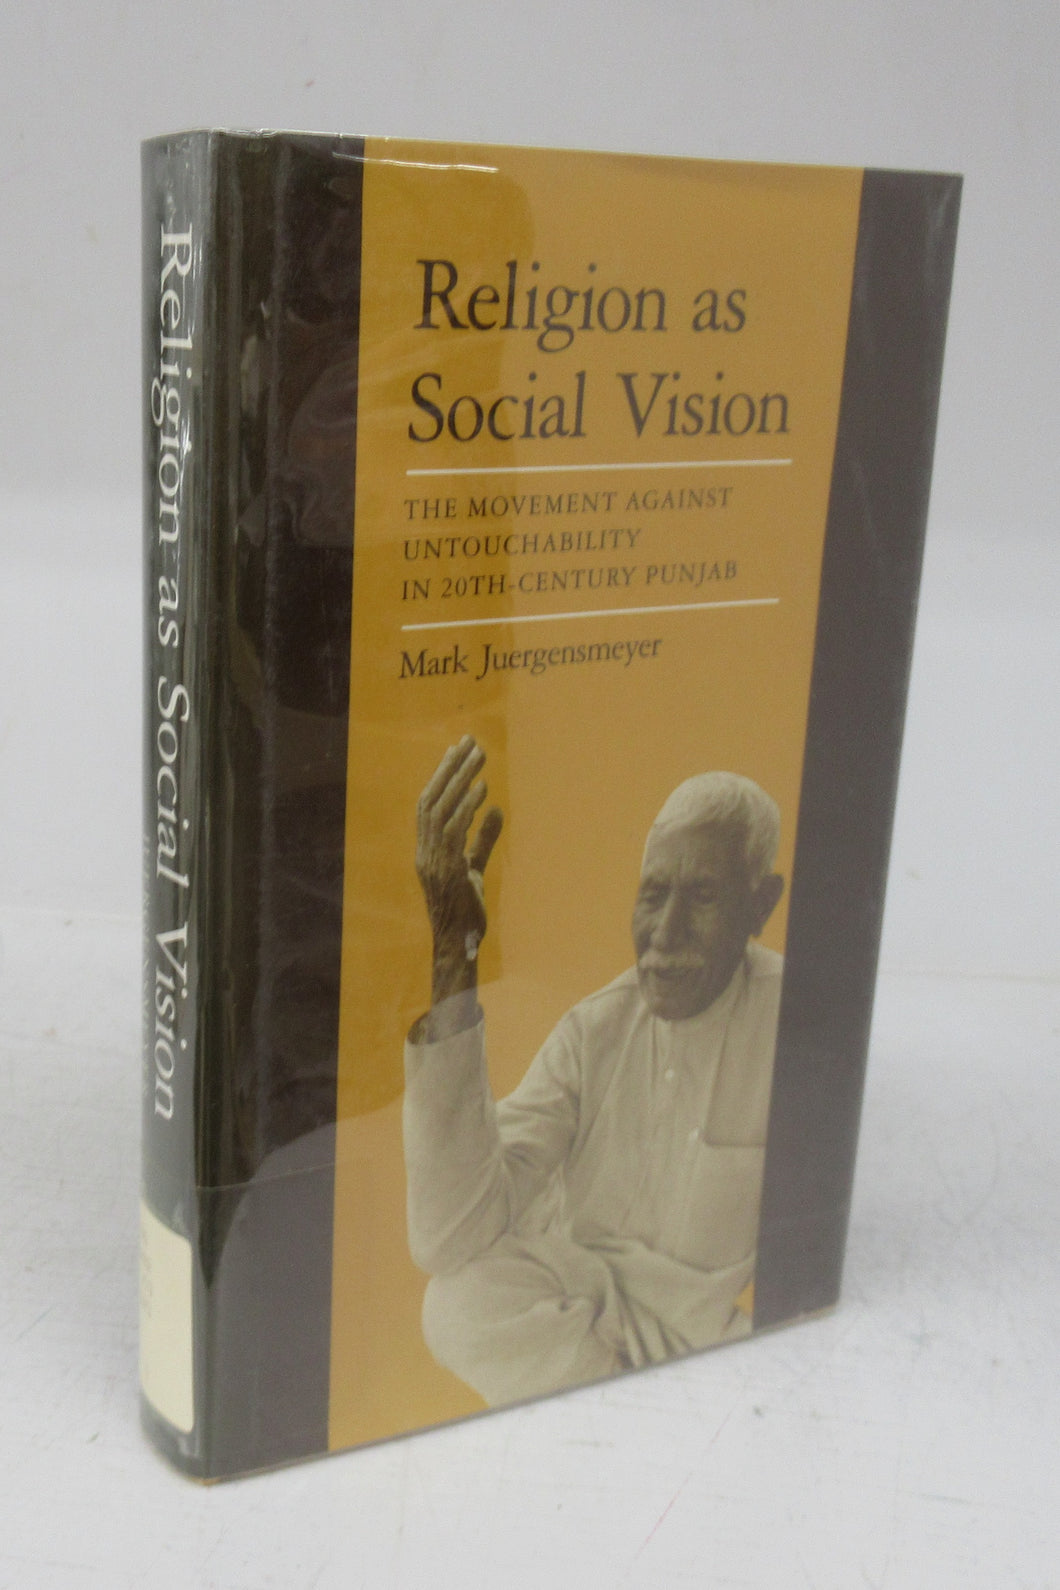 Religion as Social Vision: The Movement Against Untouchability in 20th-Century Punjab